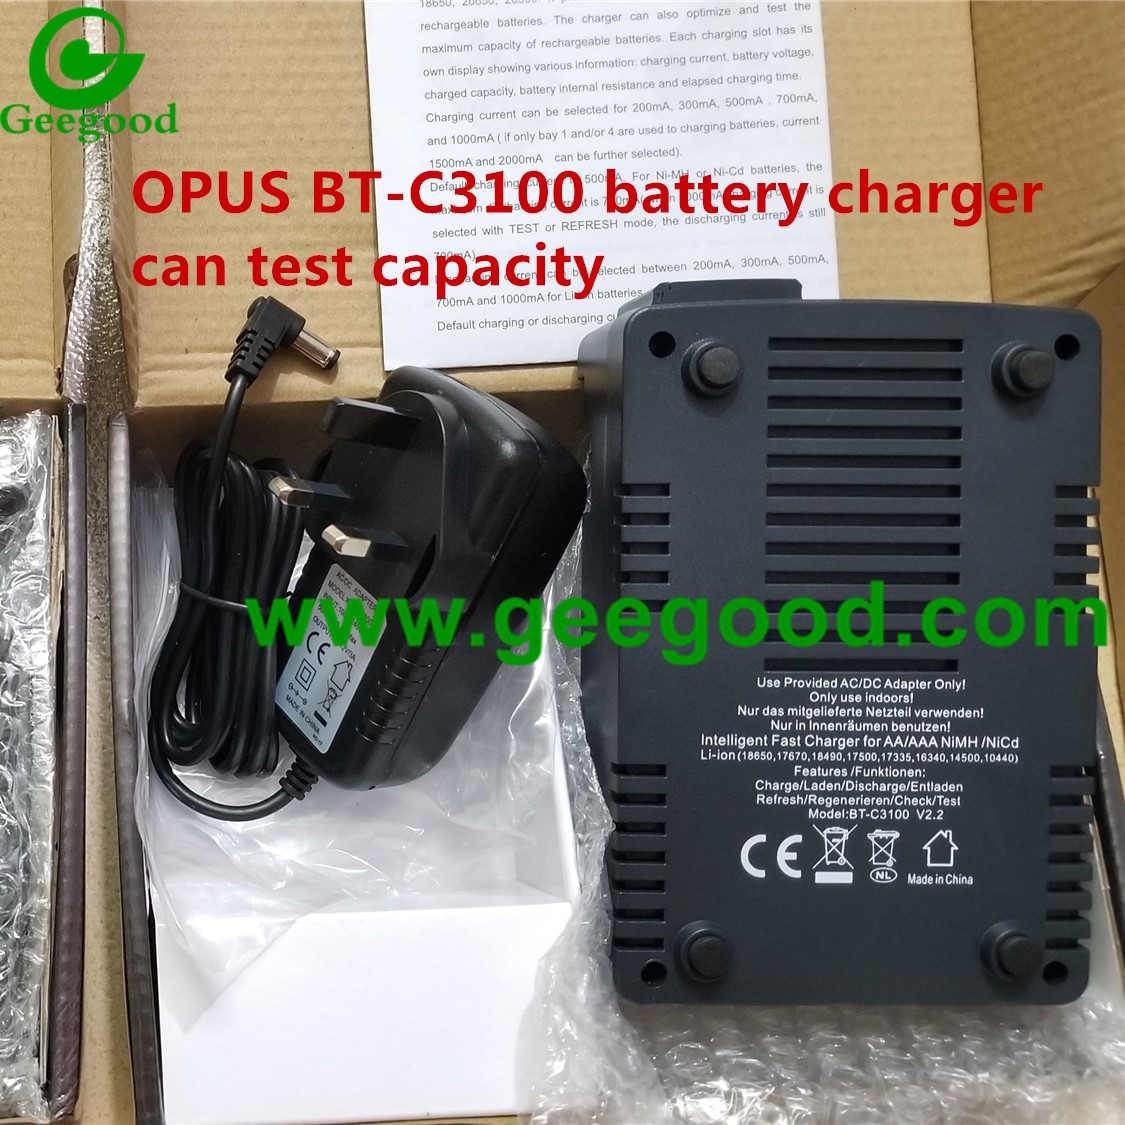 Test battery capacity charger OPUS BT-C3100 4 slots battery charger